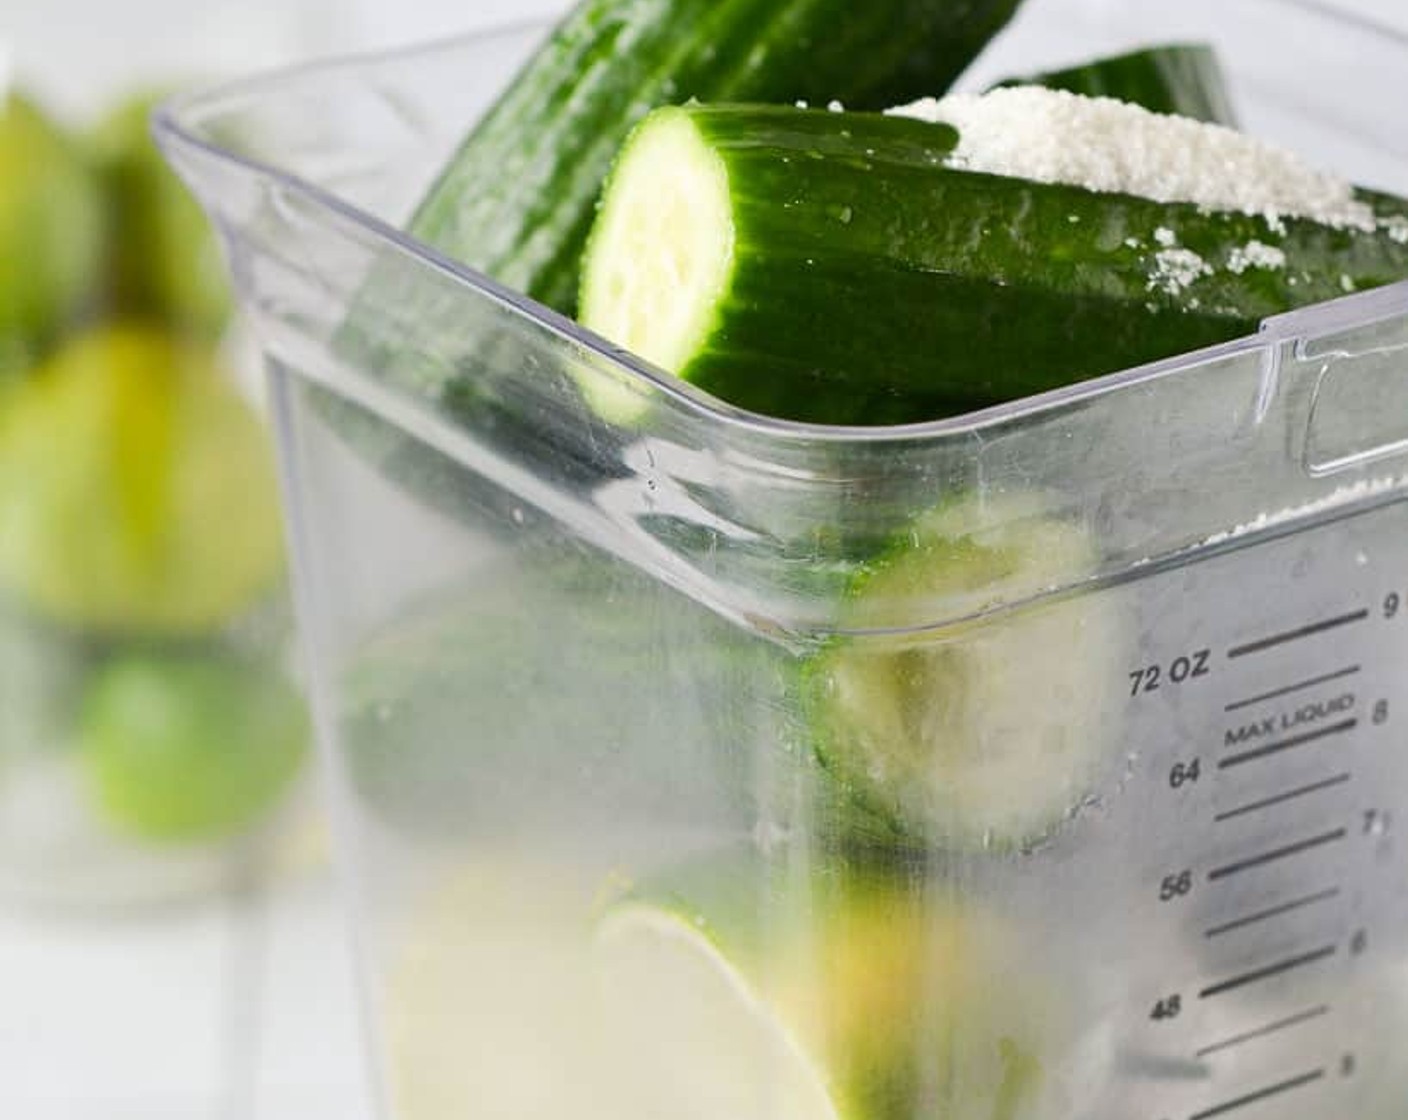 step 2 Add the cucumbers, limes, Fresh Mint (1/3 cup), and Granulated Sugar (1/3 cup) into the blender. Keep the skins of the cucumbers and limes on. Pour the Water (4 cups) over. If water doesn’t fit in your blender, pour as much as fits.